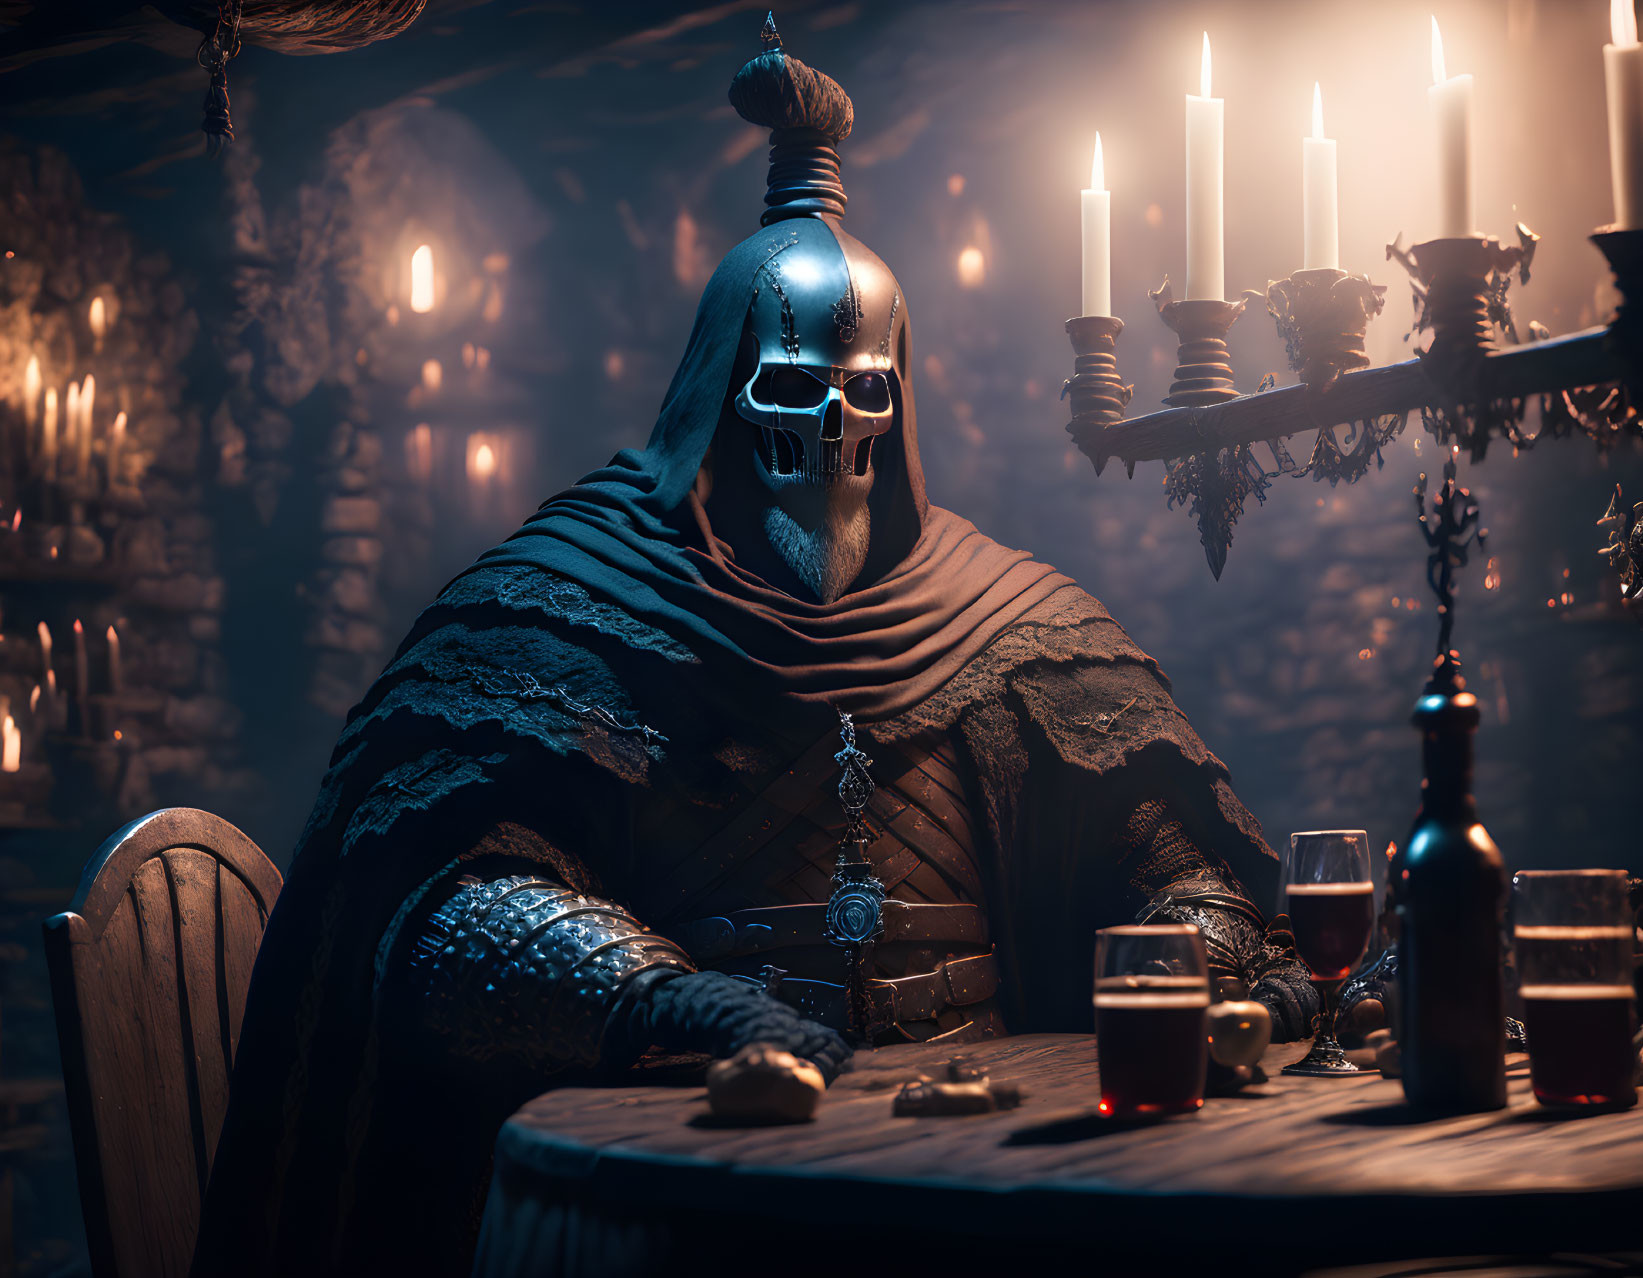 Mysterious cloaked figure in skull mask at candlelit table with goblet